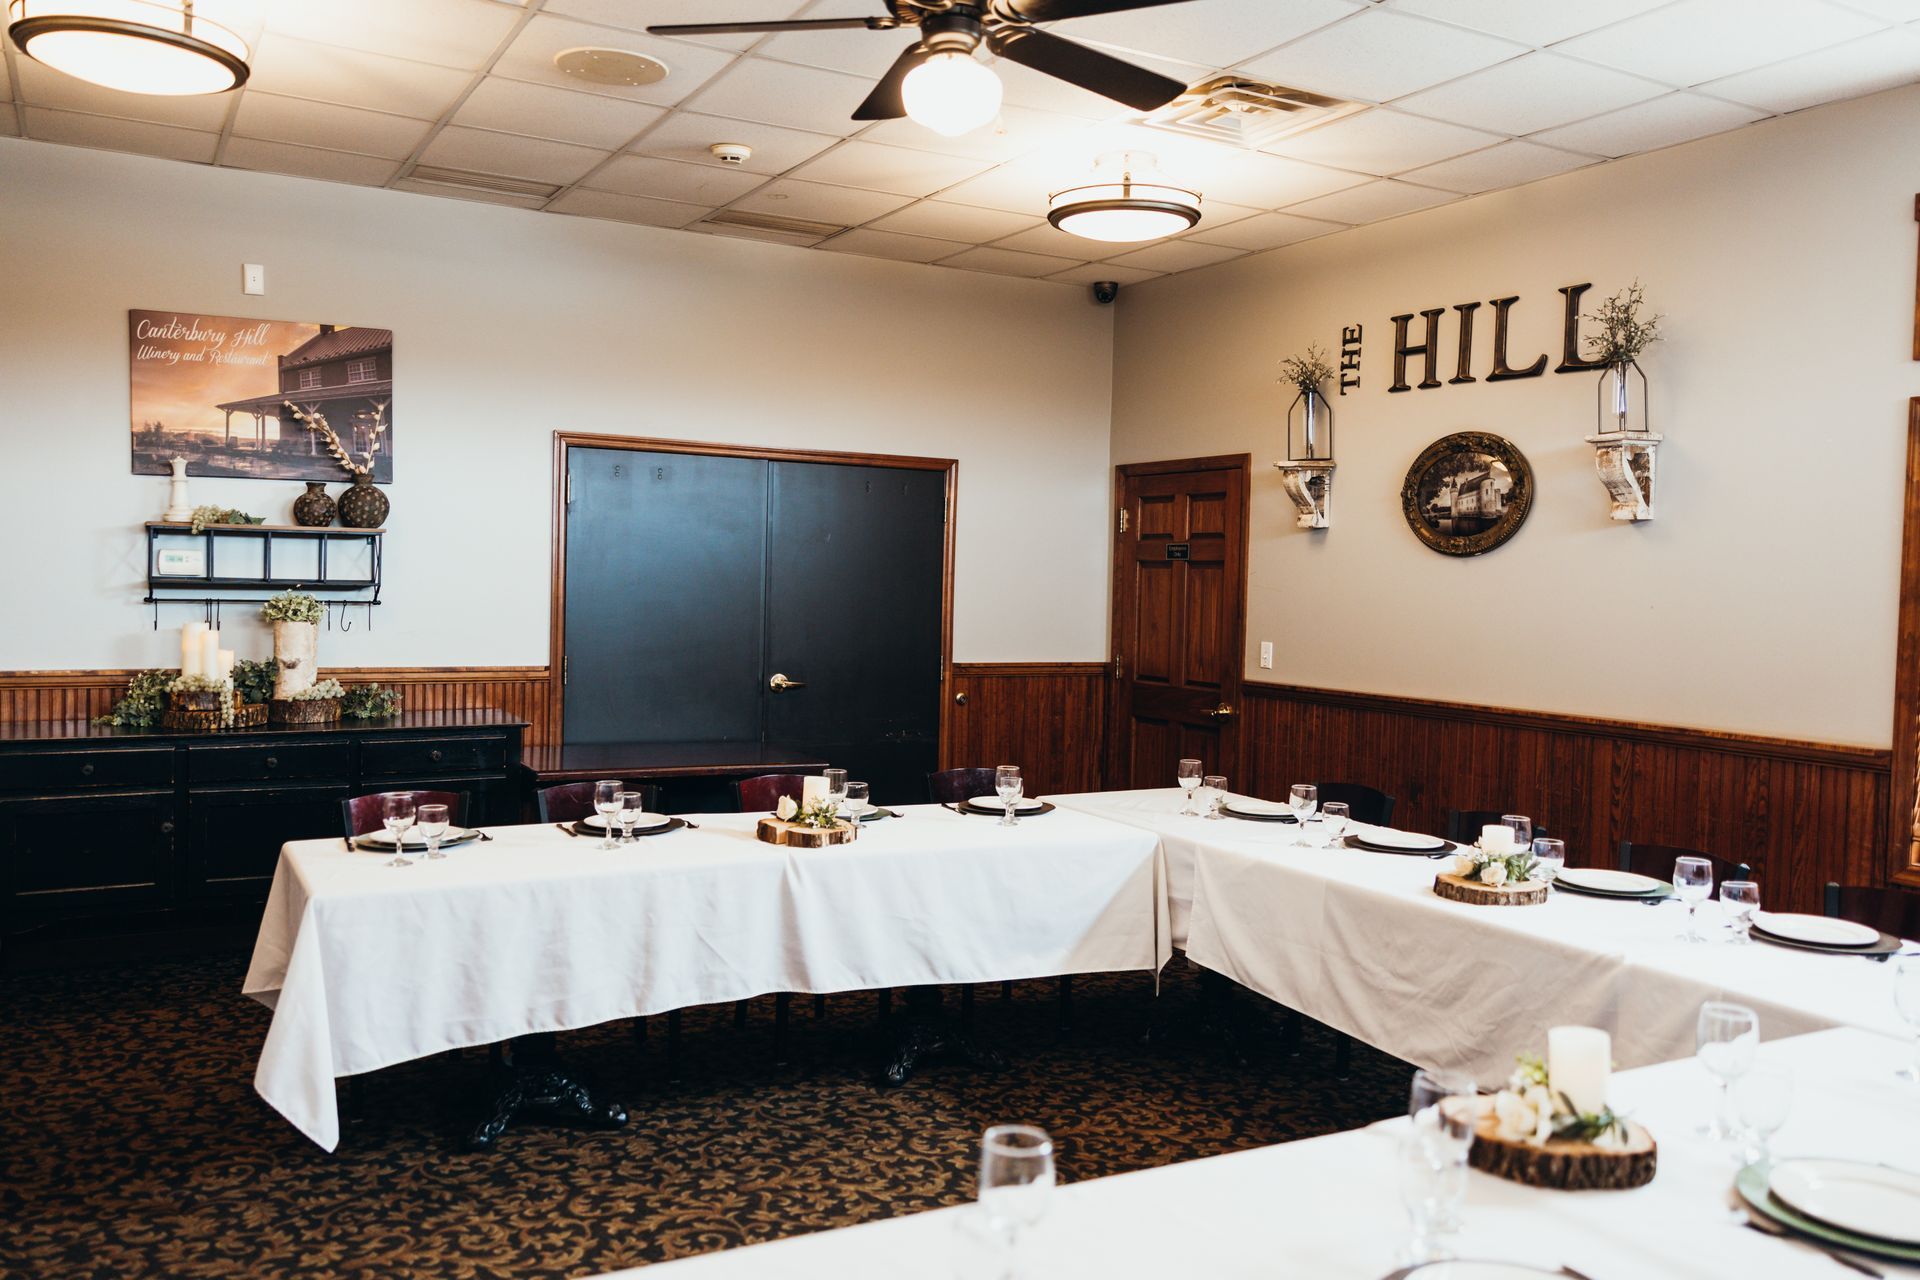 Plan a Perfect Private Event at the Hill. Book the Norton Room for Your Small Party or Gathering.